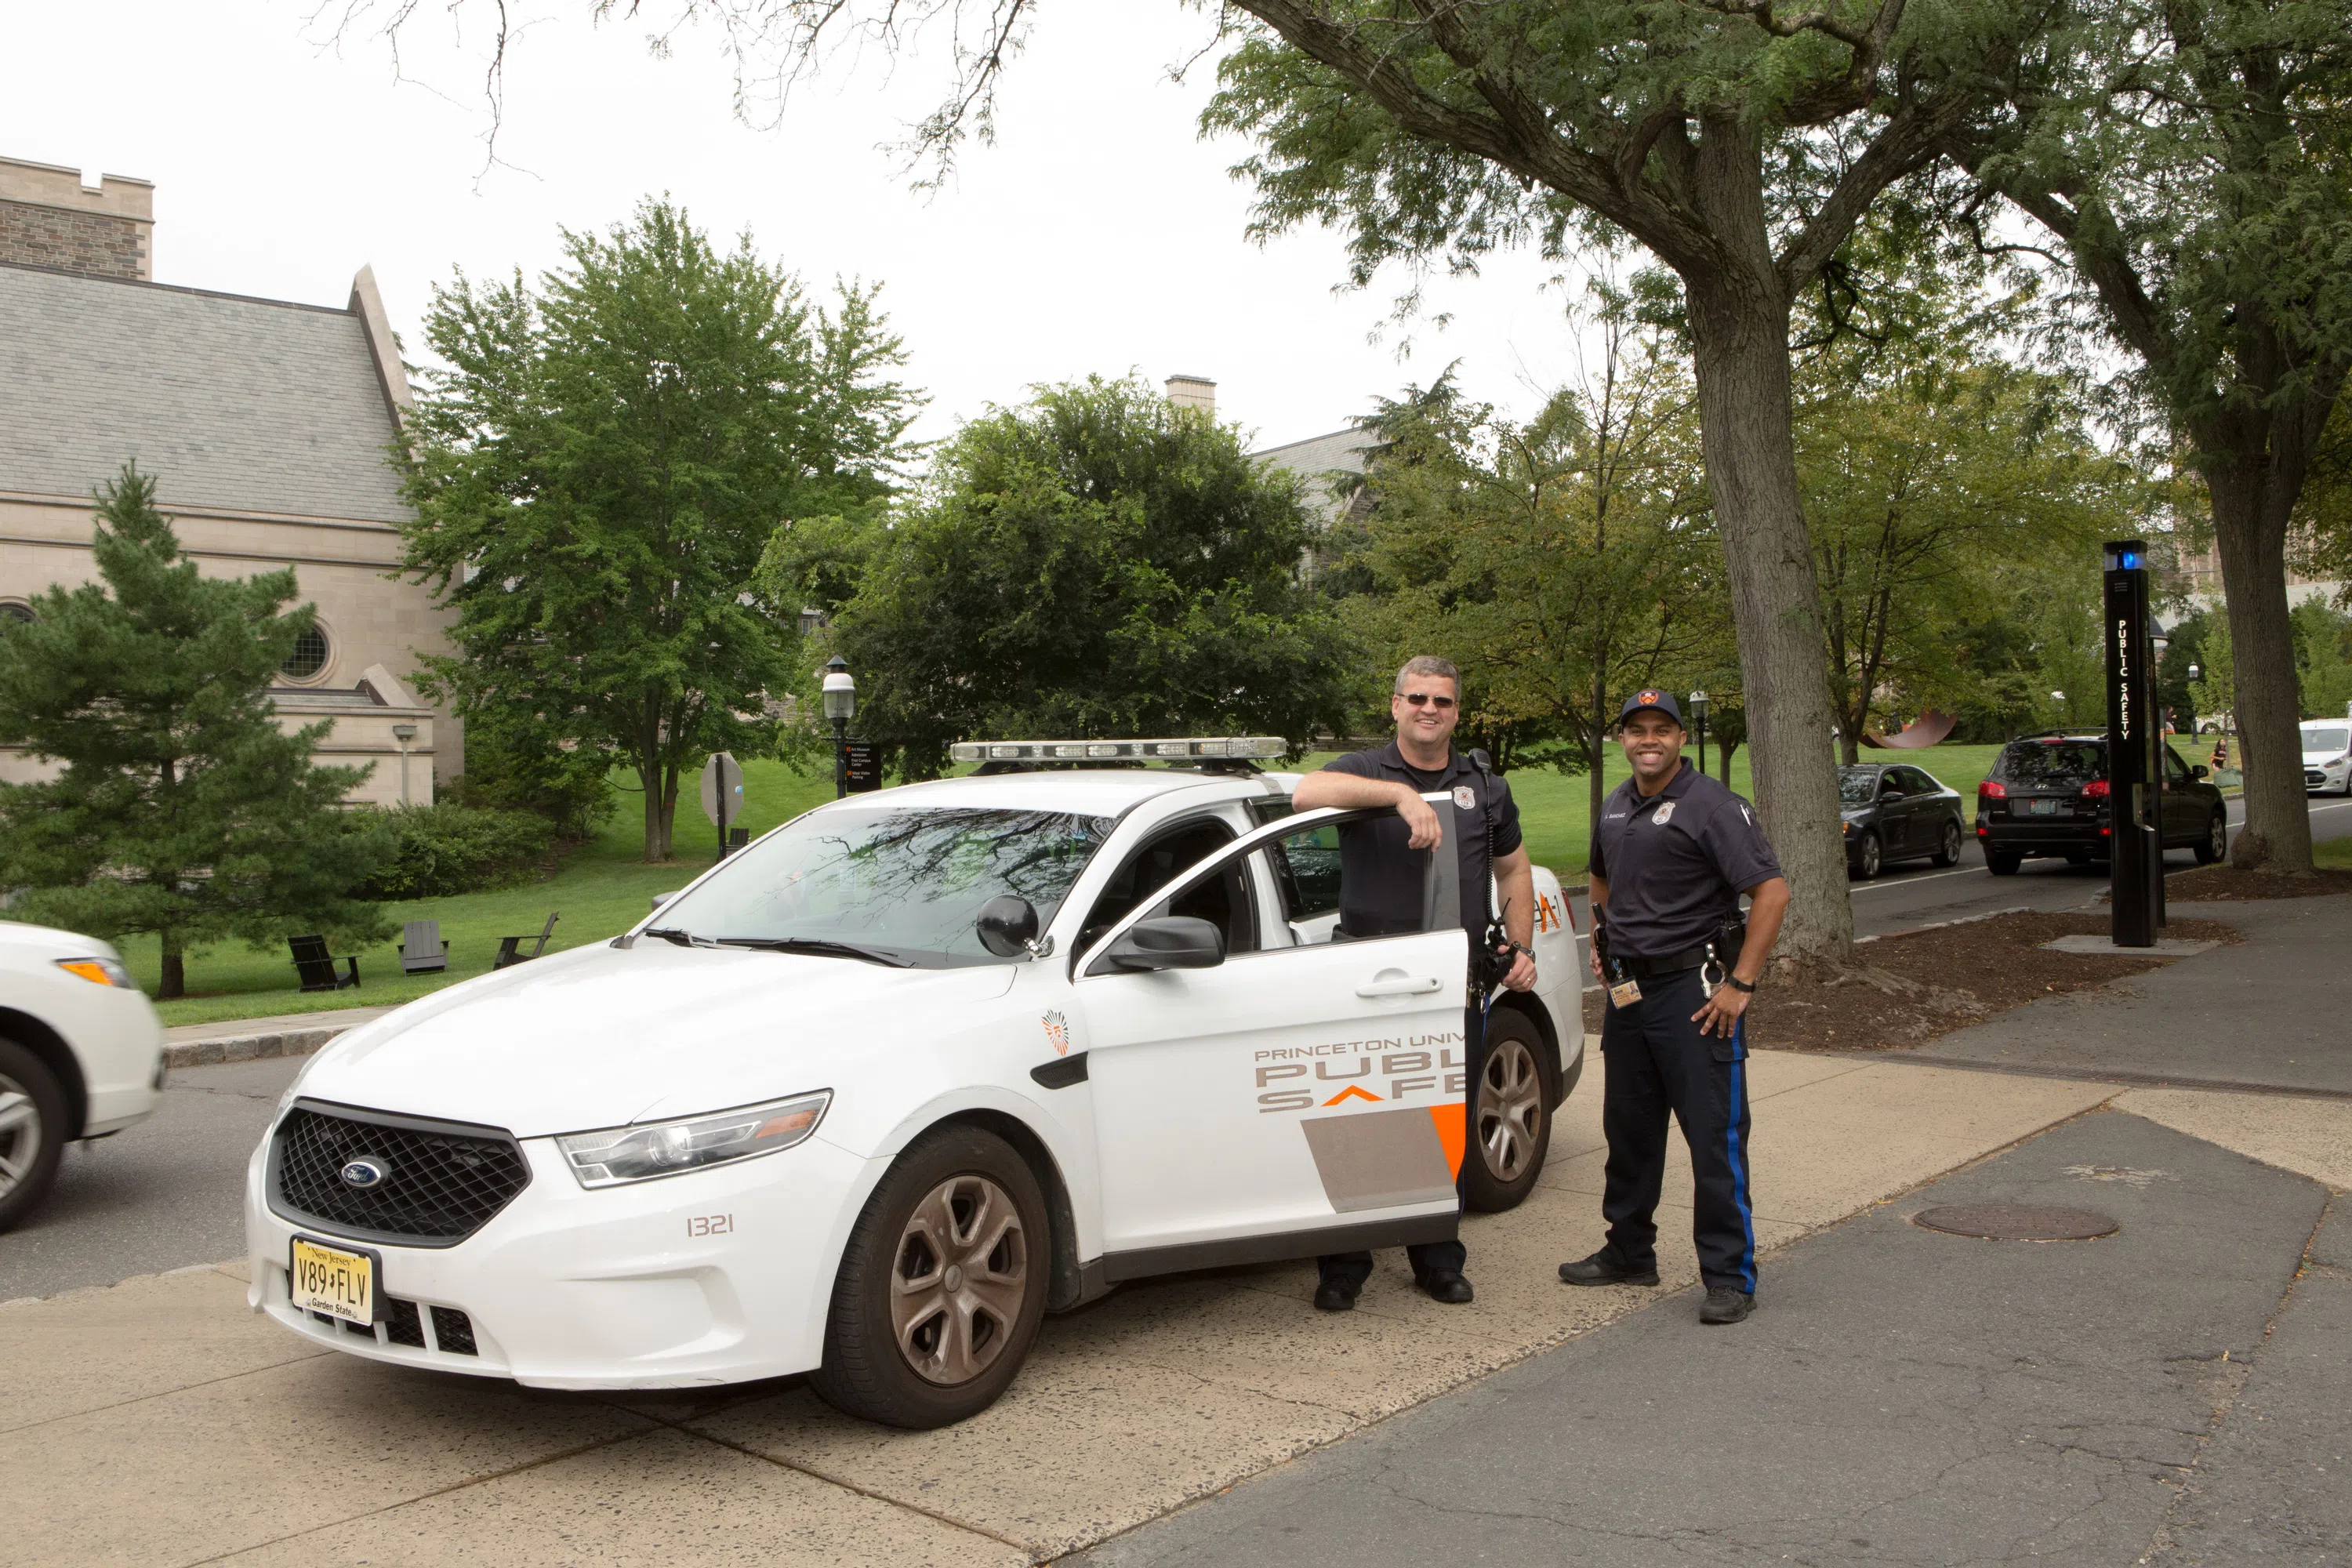 Public Safety standing by their PSAFE car